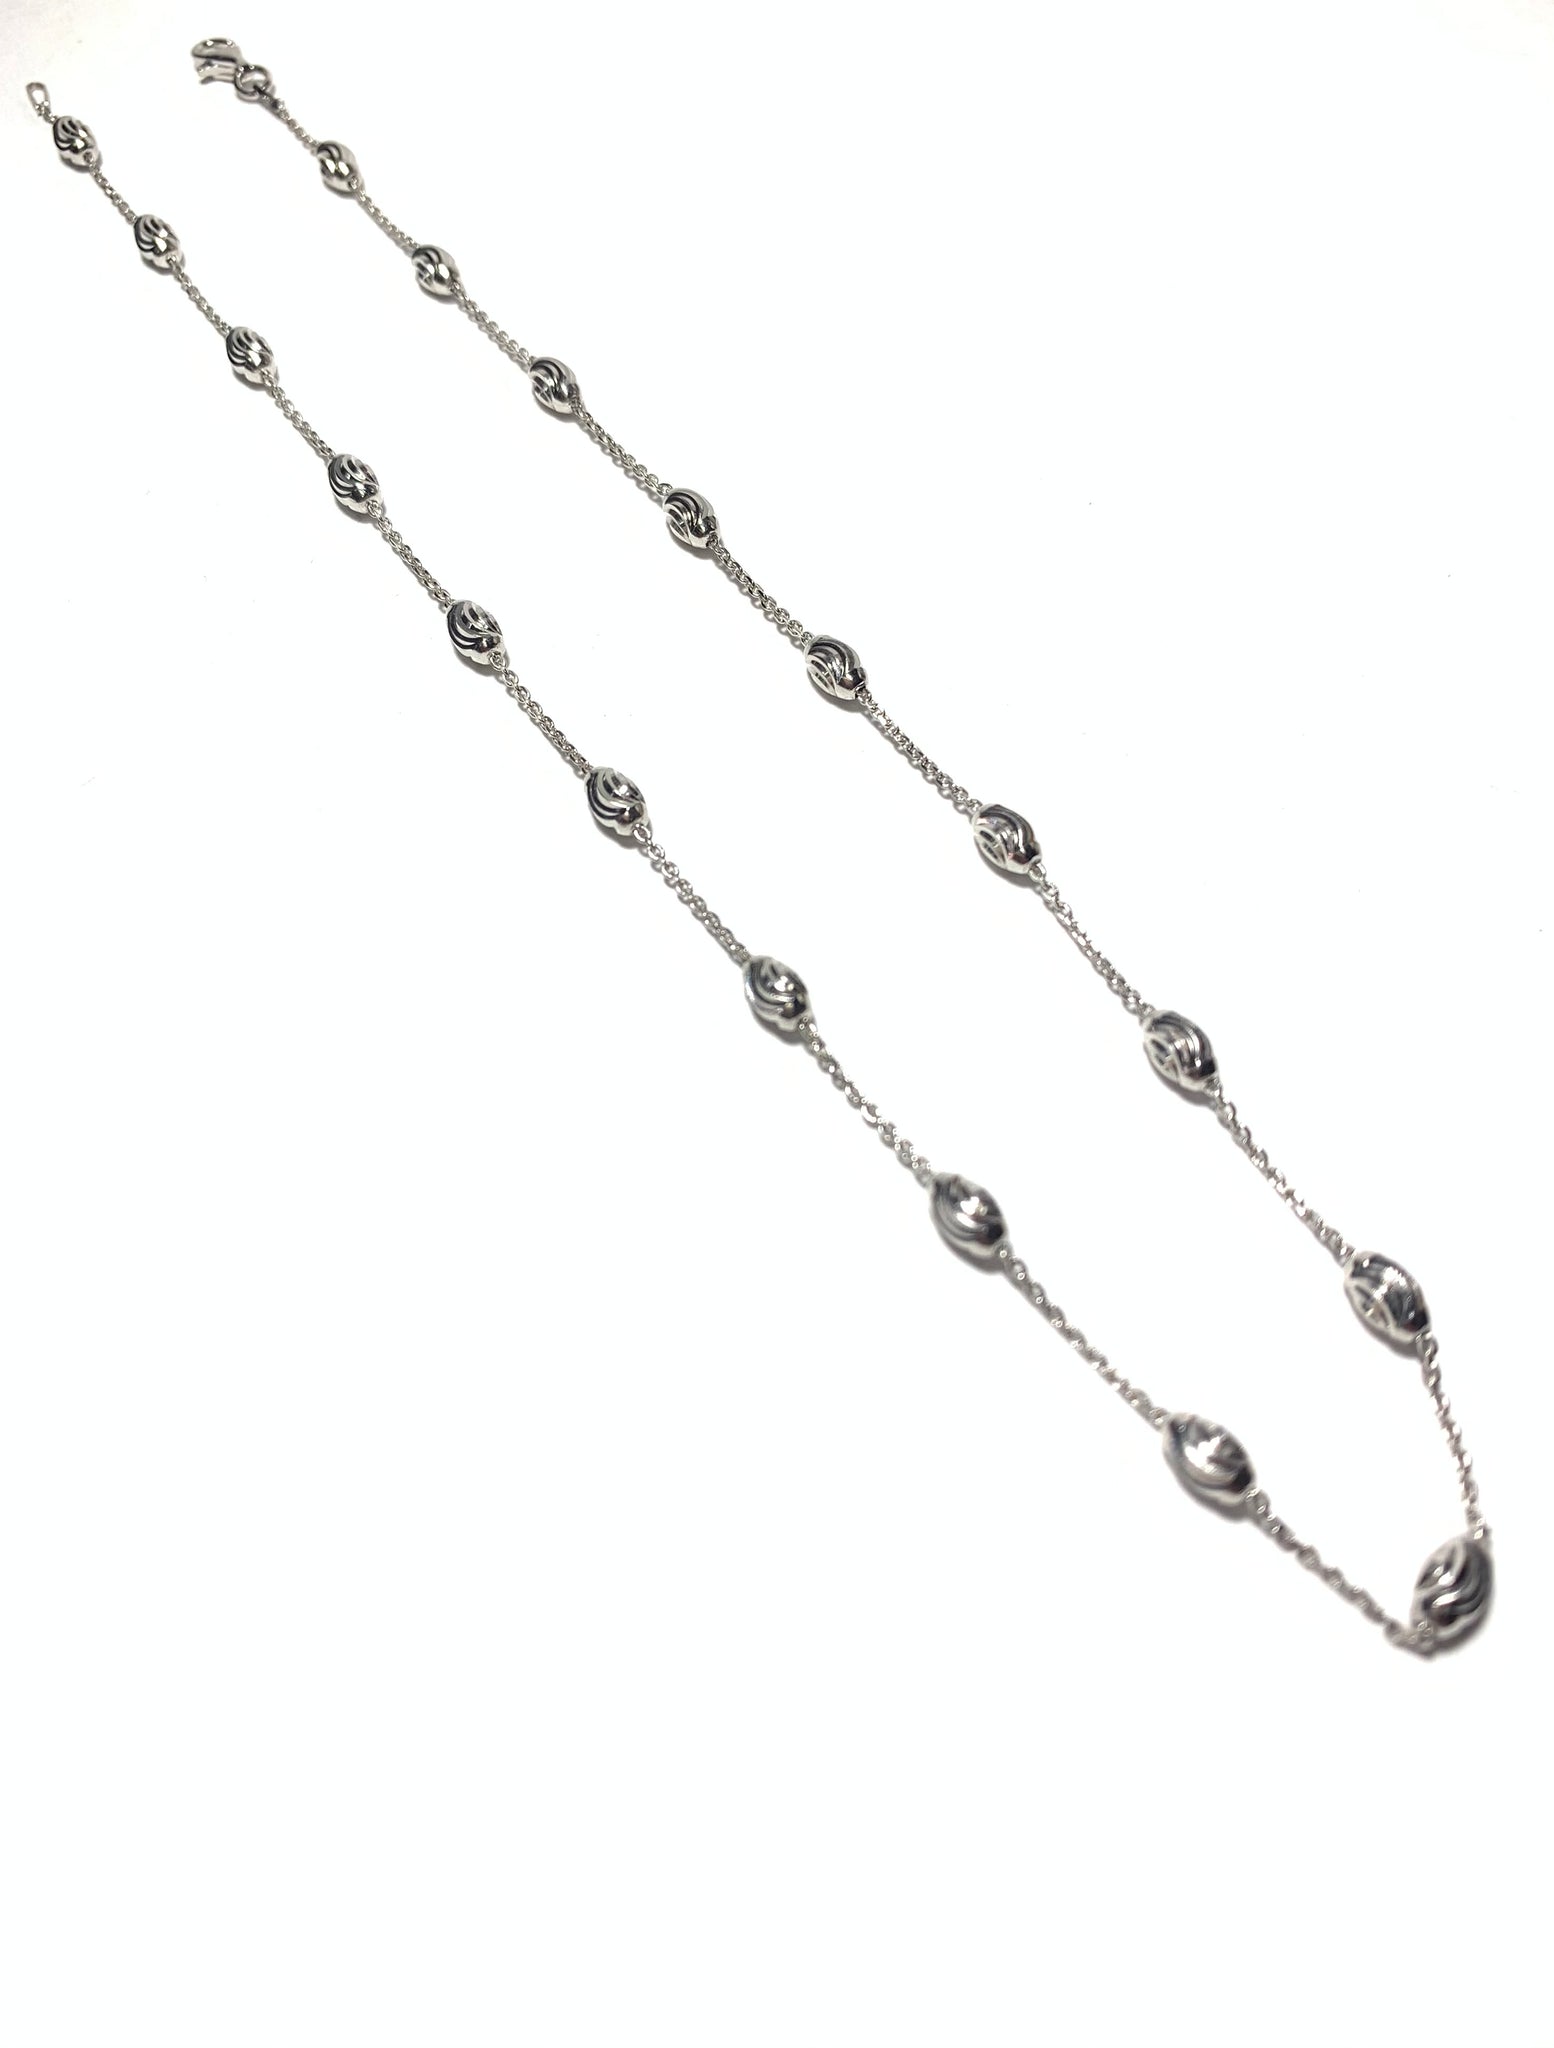 Solid 925 Sterling Silver Italian Oval Bead Rice Bead Chain Necklace or  Bracelet